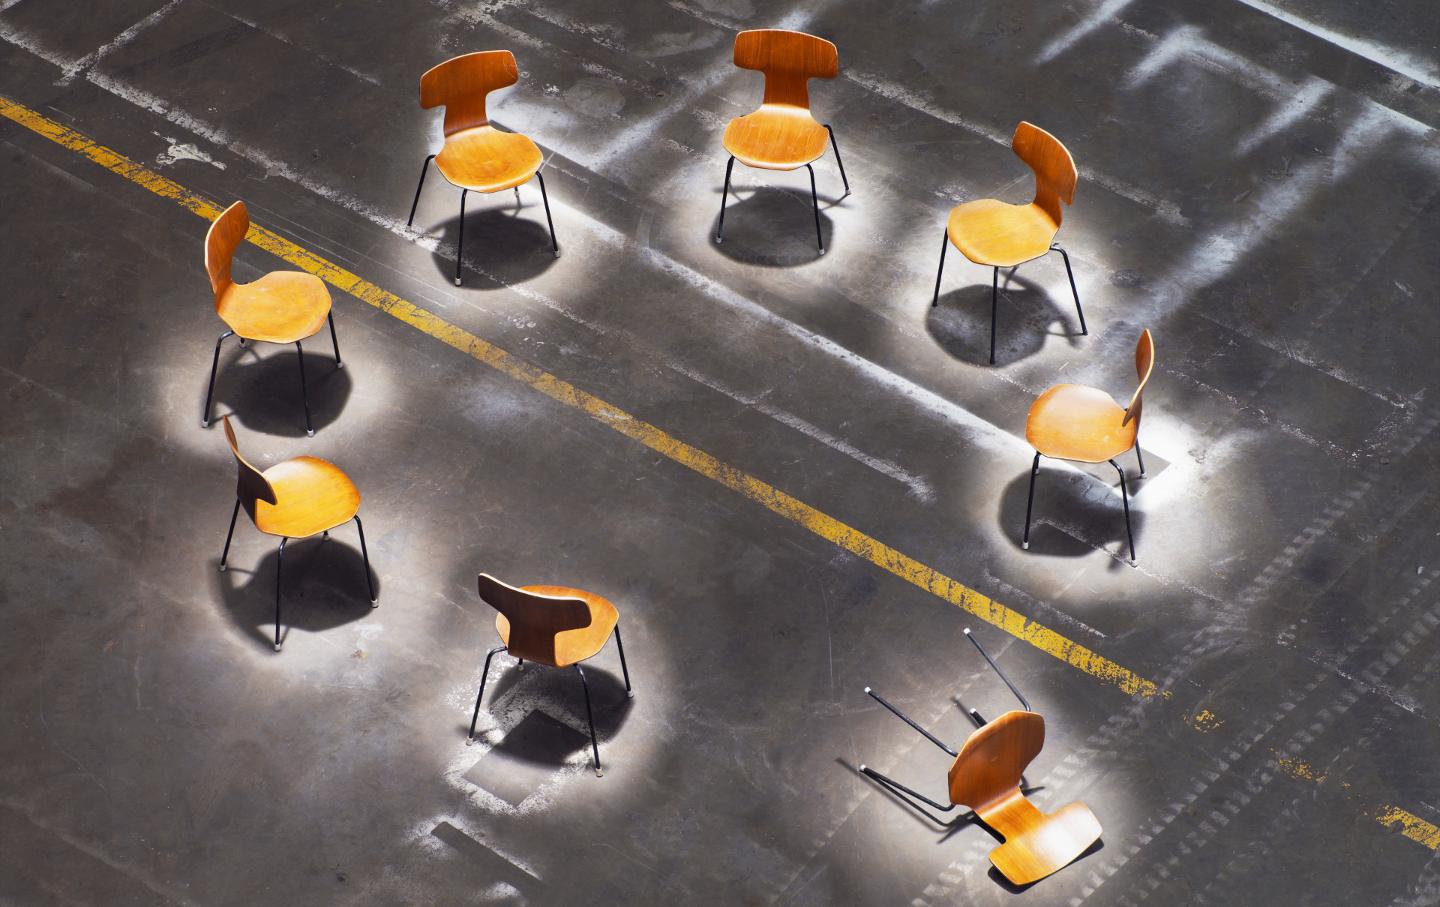 A circle of chairs with one chair tipped over, on an asphalt surface.